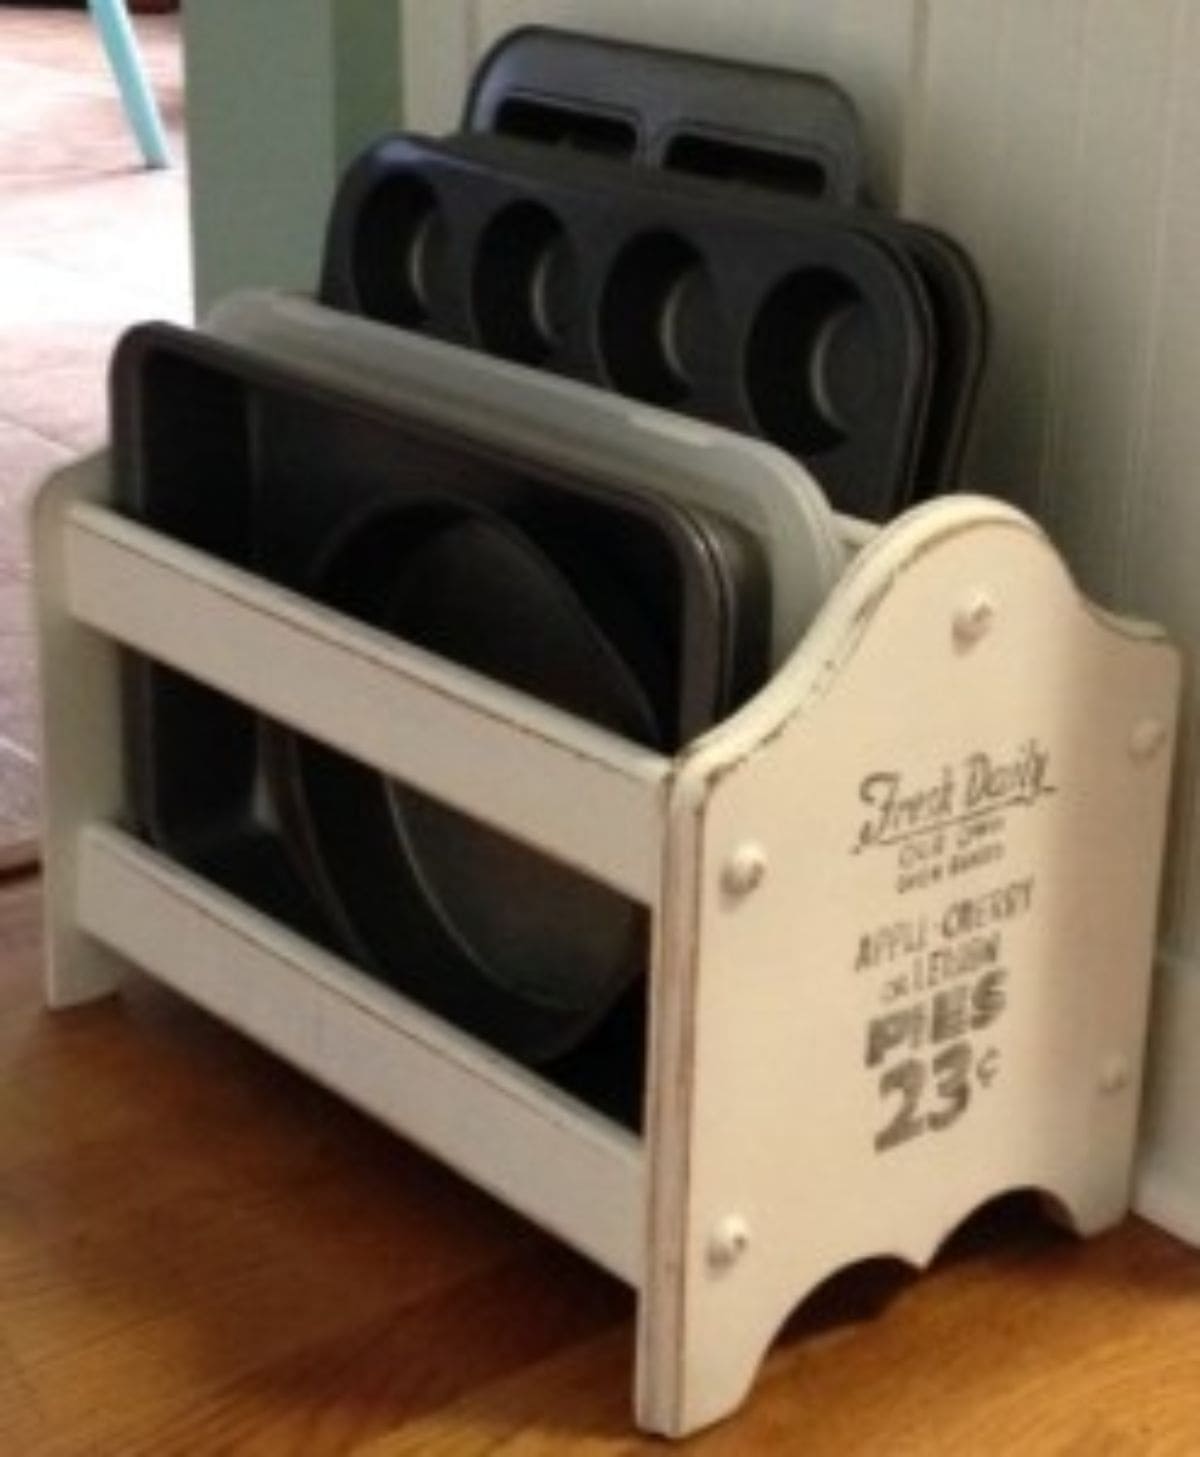 A cream shabby chic magazine rack has been repurposed to hold muffin trays and baking trays